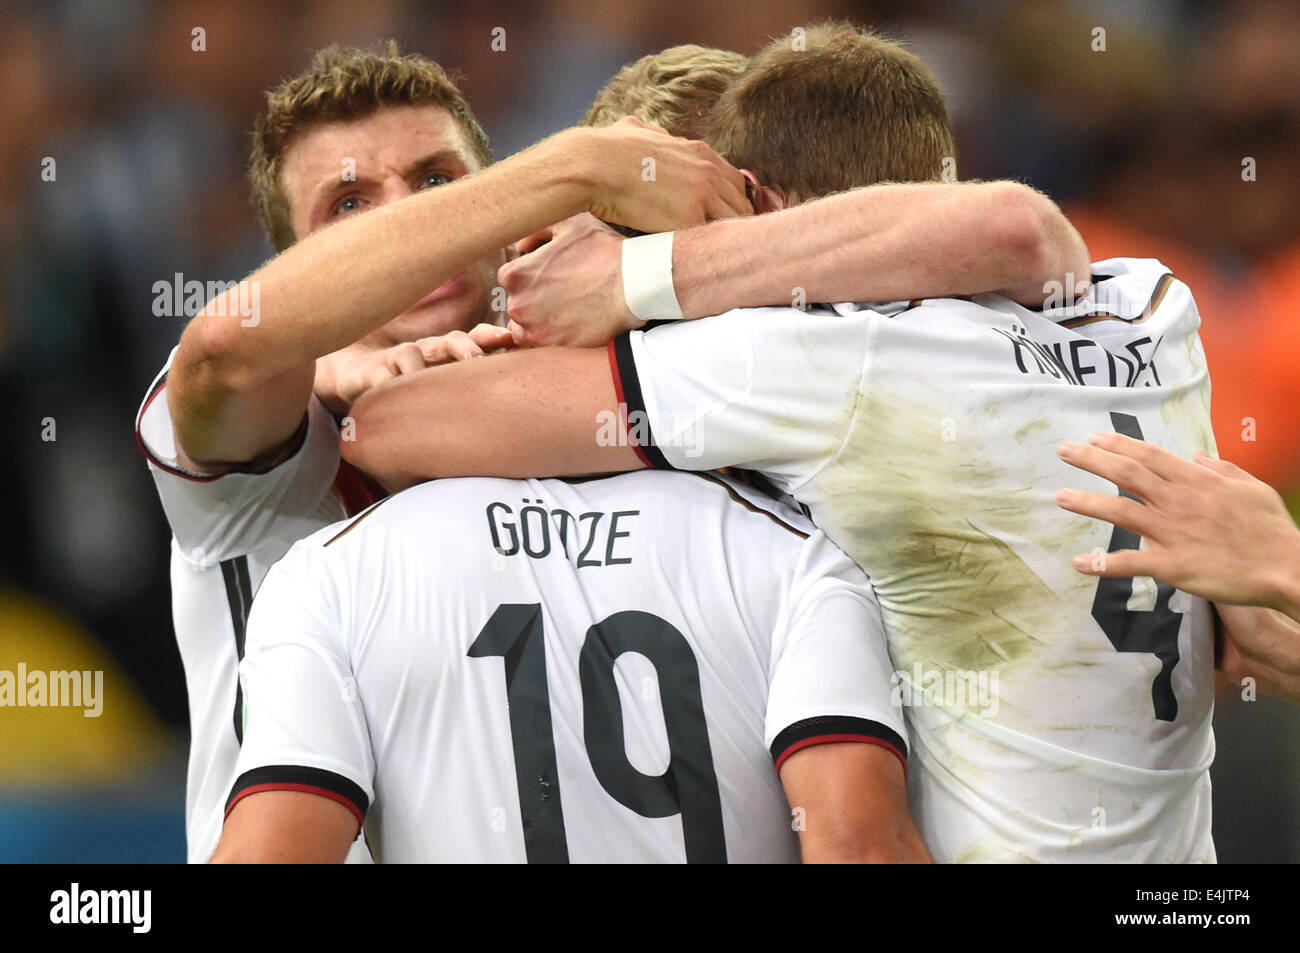 Rio de Janeiro, Brazil. 13th July, 2014. Mario Goetze (C) of Germany celebrates with his teammates after scoring 1-0 goal during the FIFA World Cup 2014 final soccer match between Germany and Argentina at the Estadio do Maracana in Rio de Janeiro, Brazil, 13 July 2014. Photo: Marcus Brandt/dpa/Alamy Live News Stock Photo